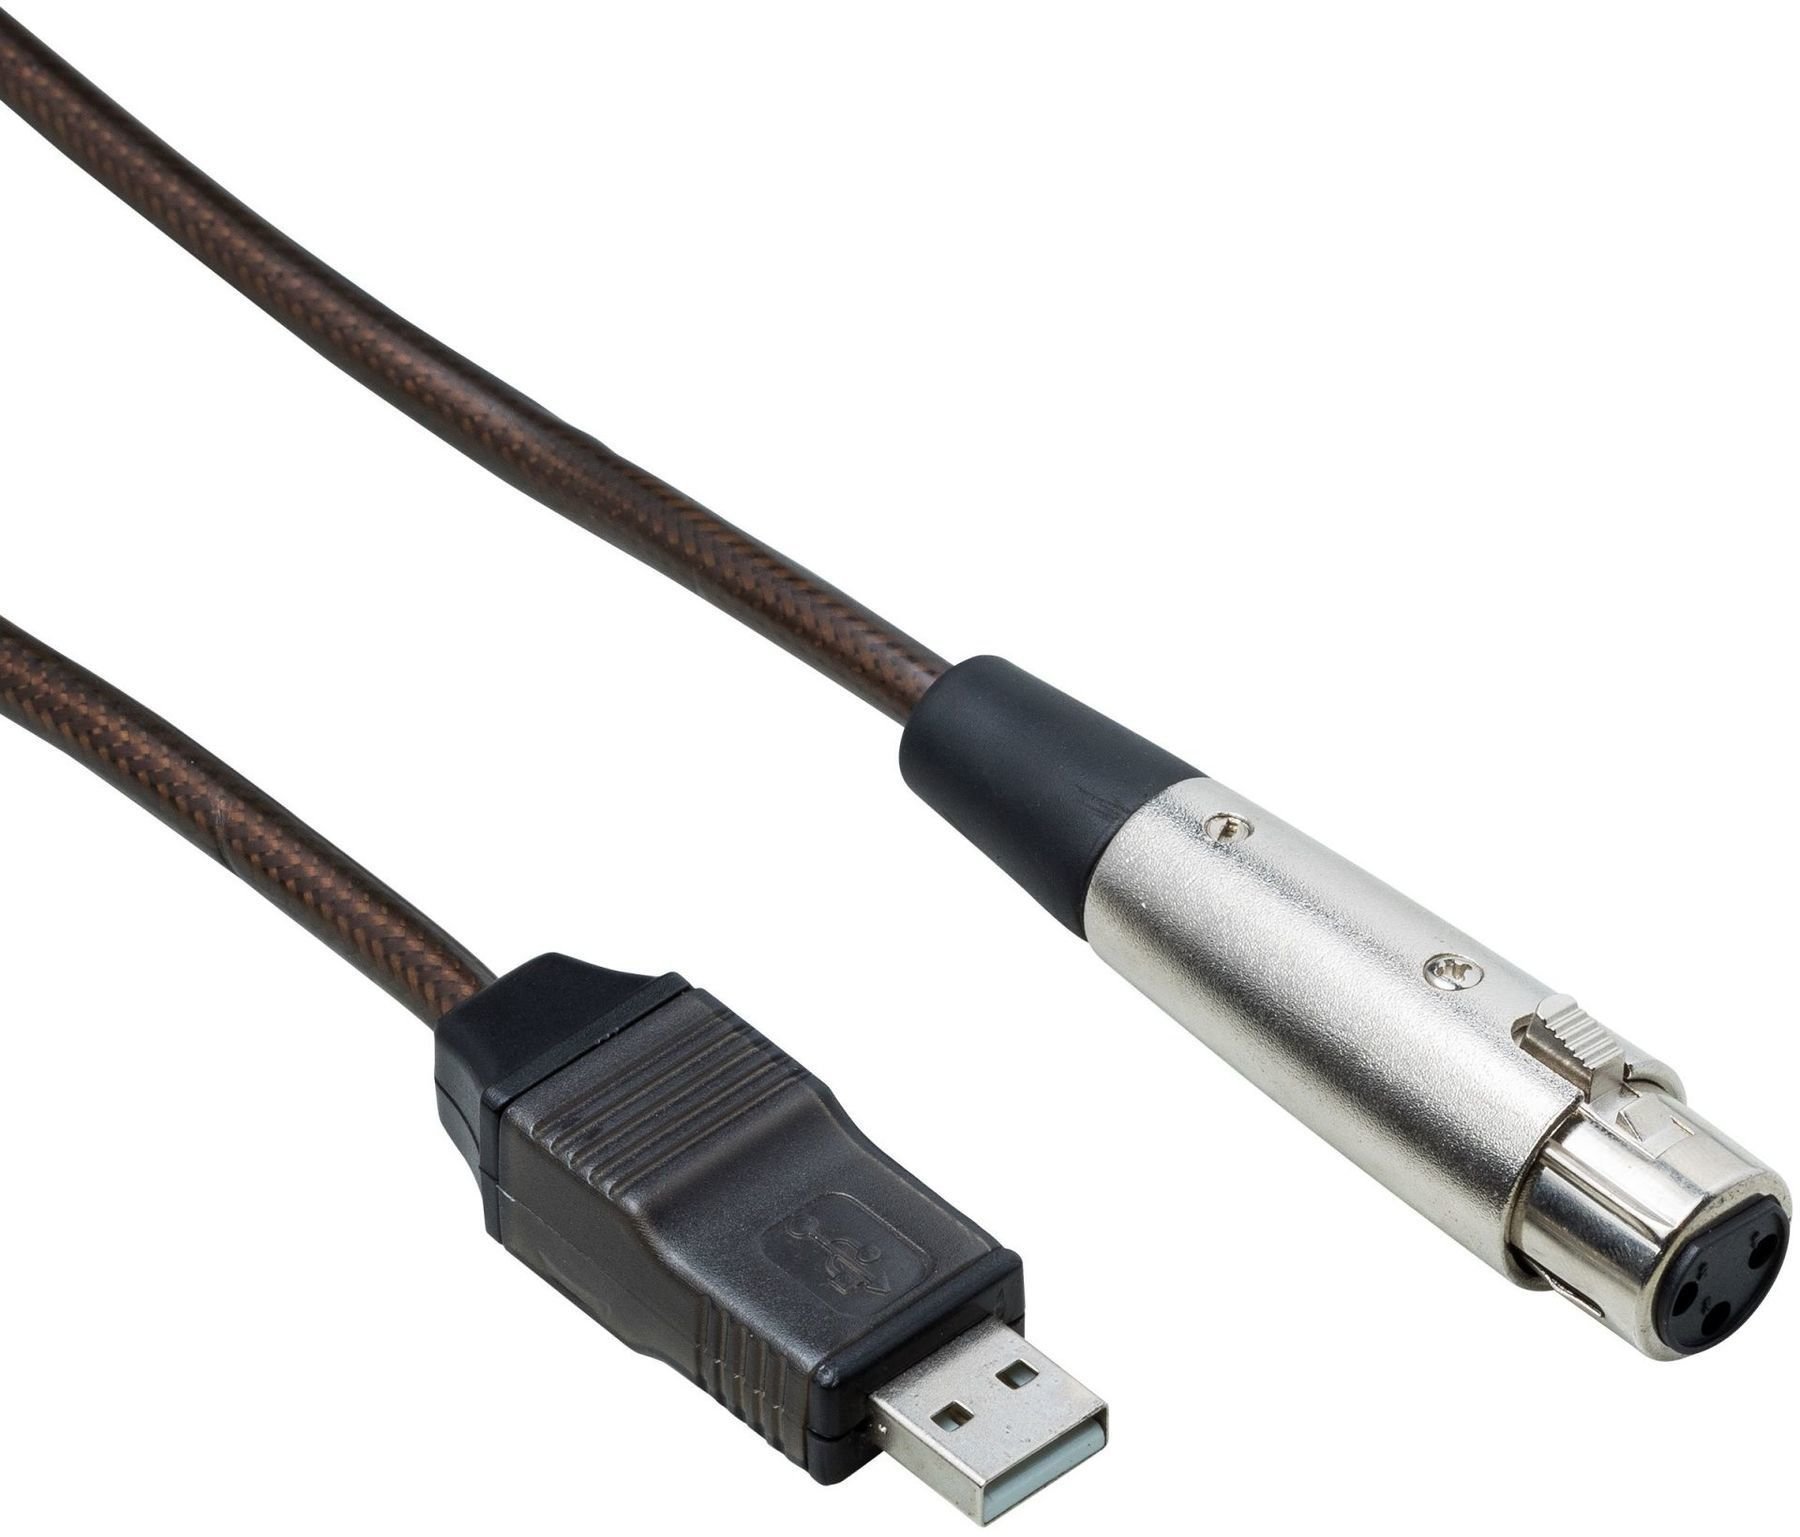 USB Cable Bespeco BMUSB200 Brown 3 m USB Cable